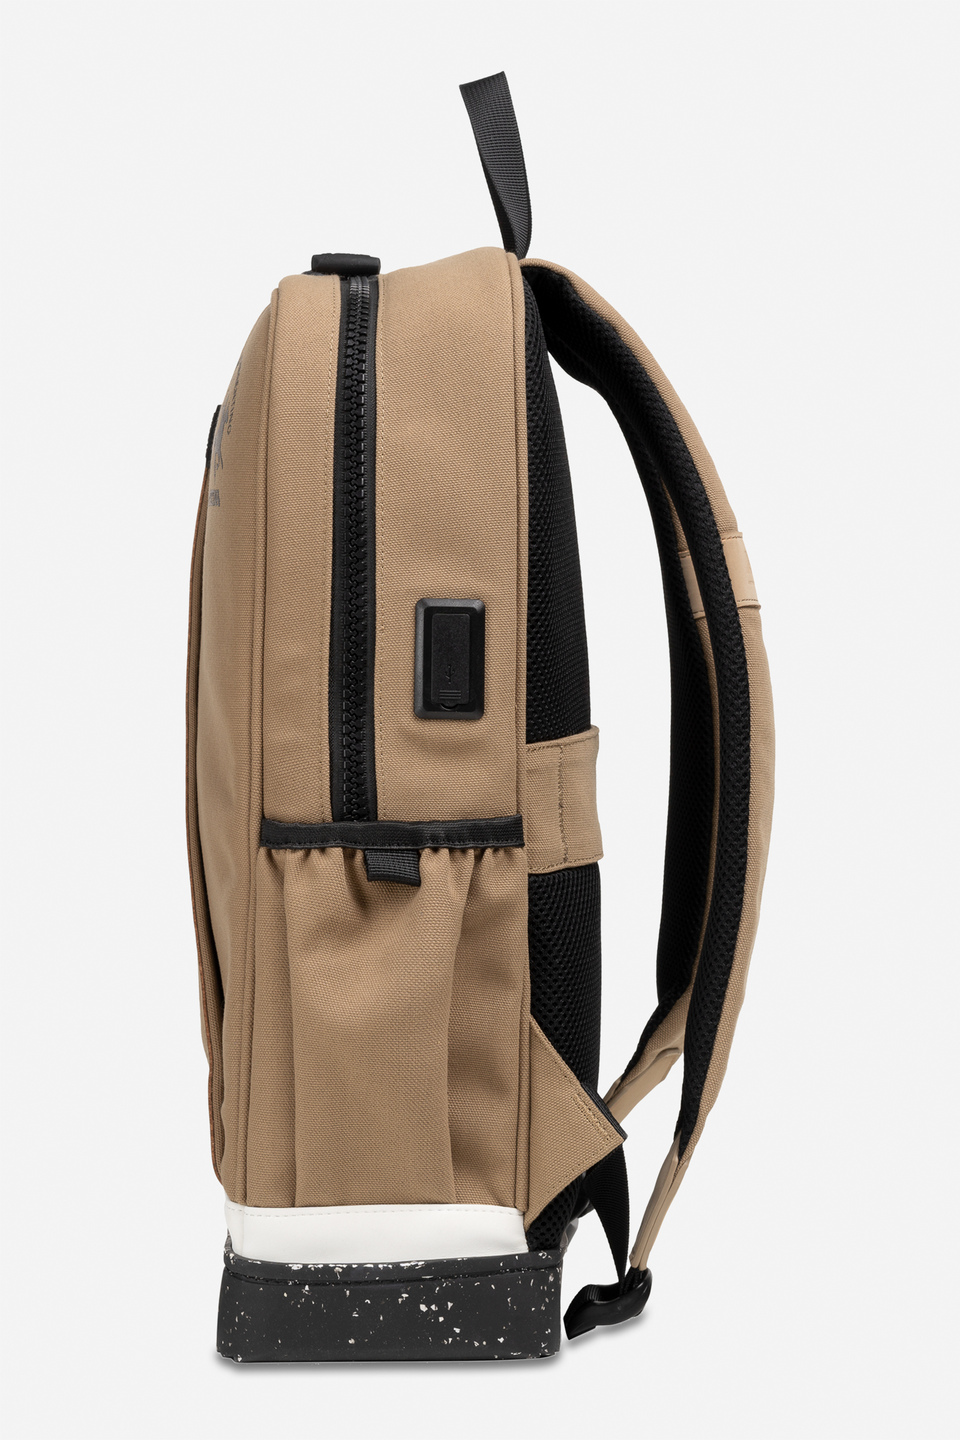 Rucksack in recycled cotton fabric | La Martina - Official Online Shop